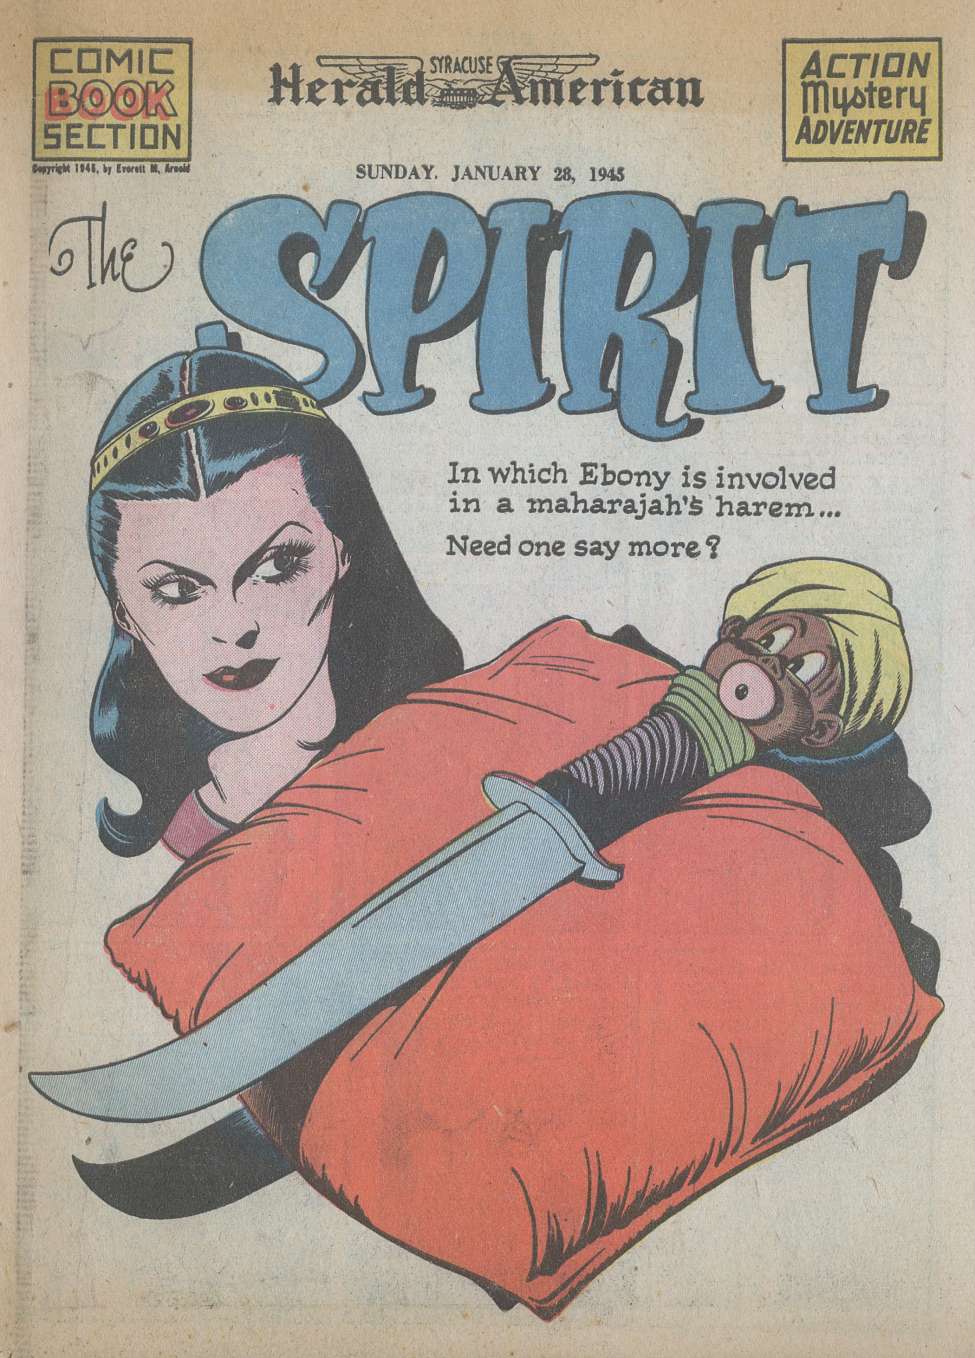 Book Cover For The Spirit (1945-01-28) - Syracuse Herald American - Version 2